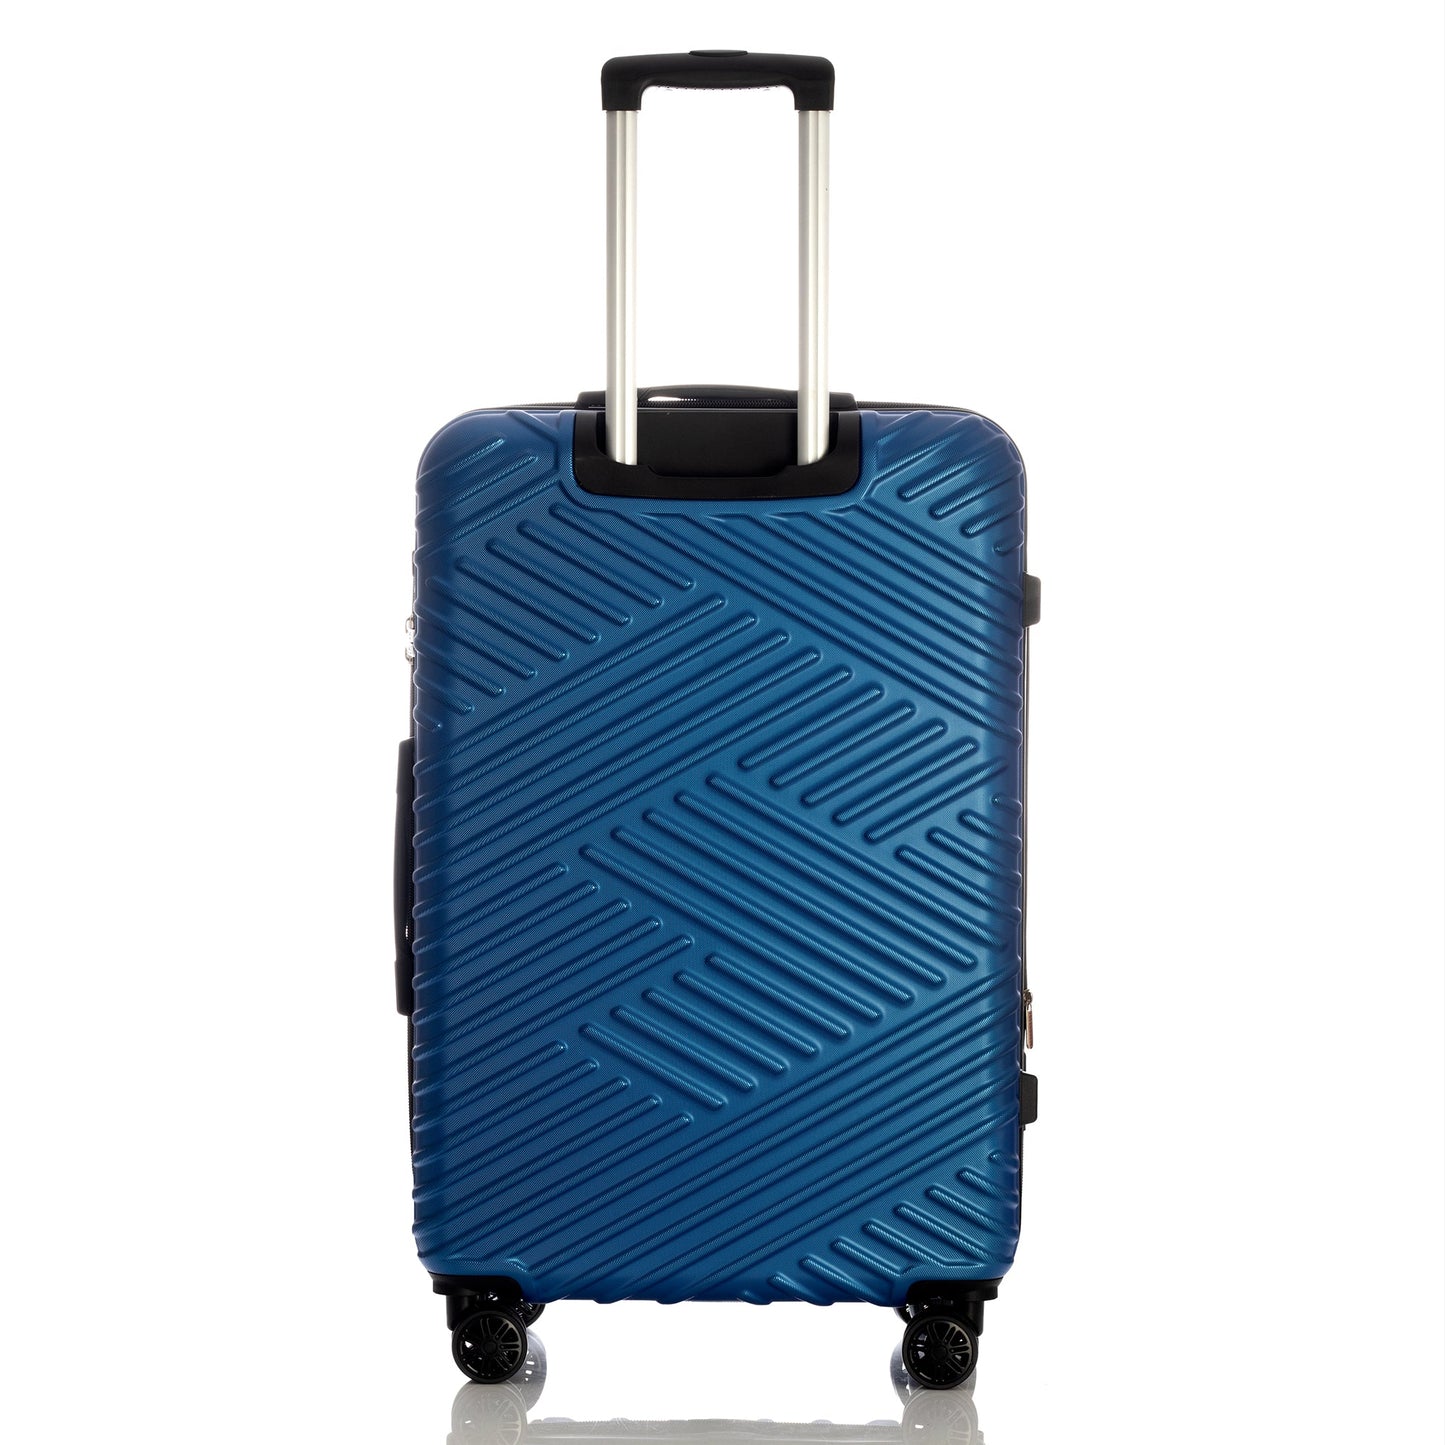 Neon Collection Blue luggage (21/25/29") Suitcase Lock Spinner Hardshell